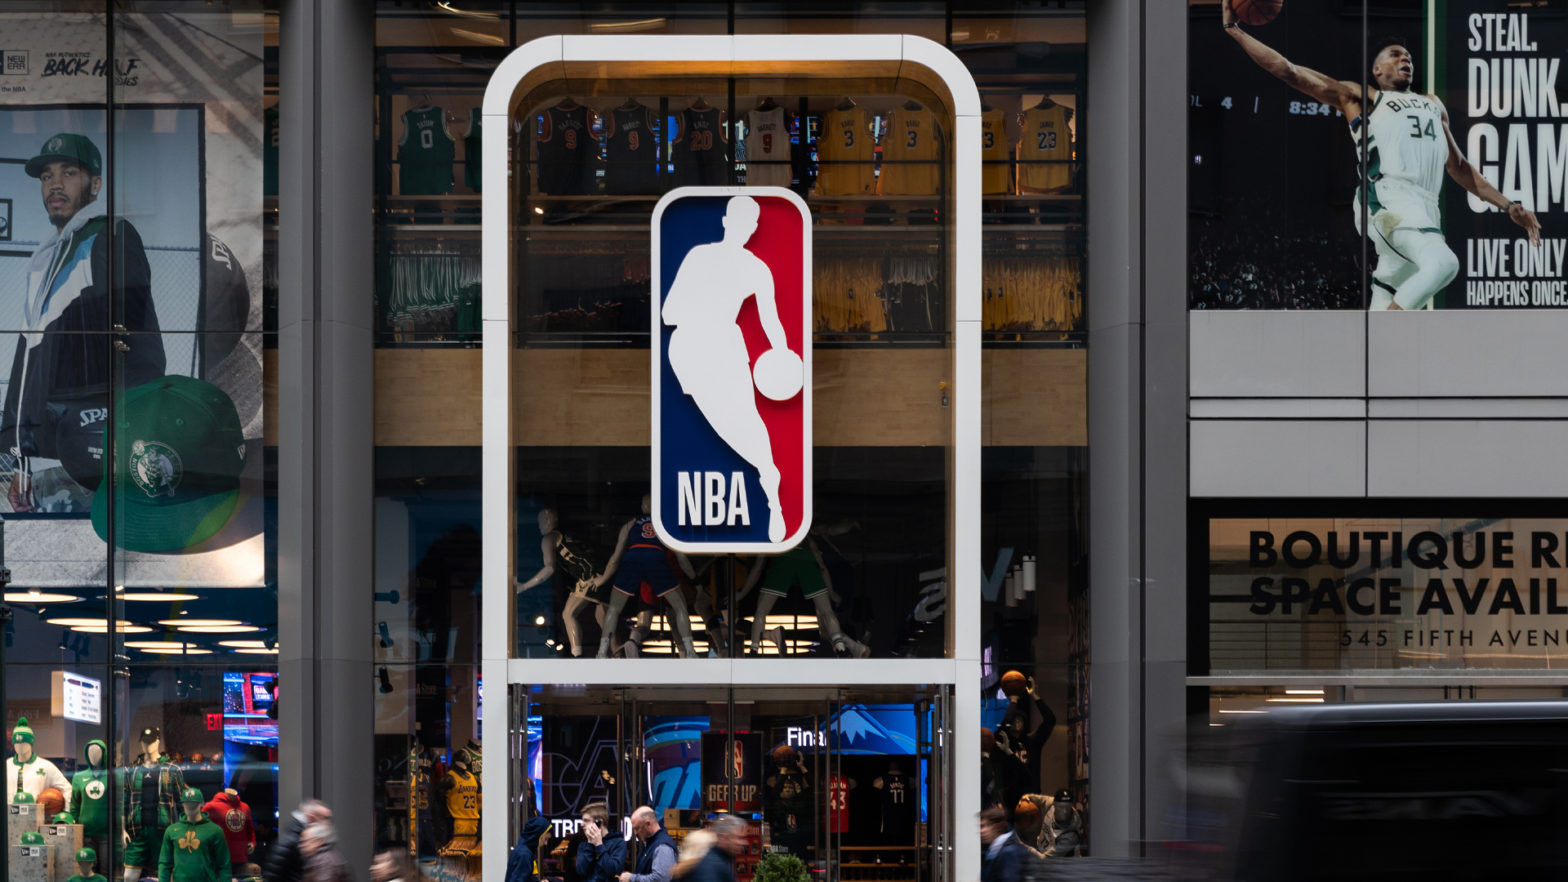 Google Pixel To Become The Official Fan Phone Of The NBA Through Multi-Year Partnership